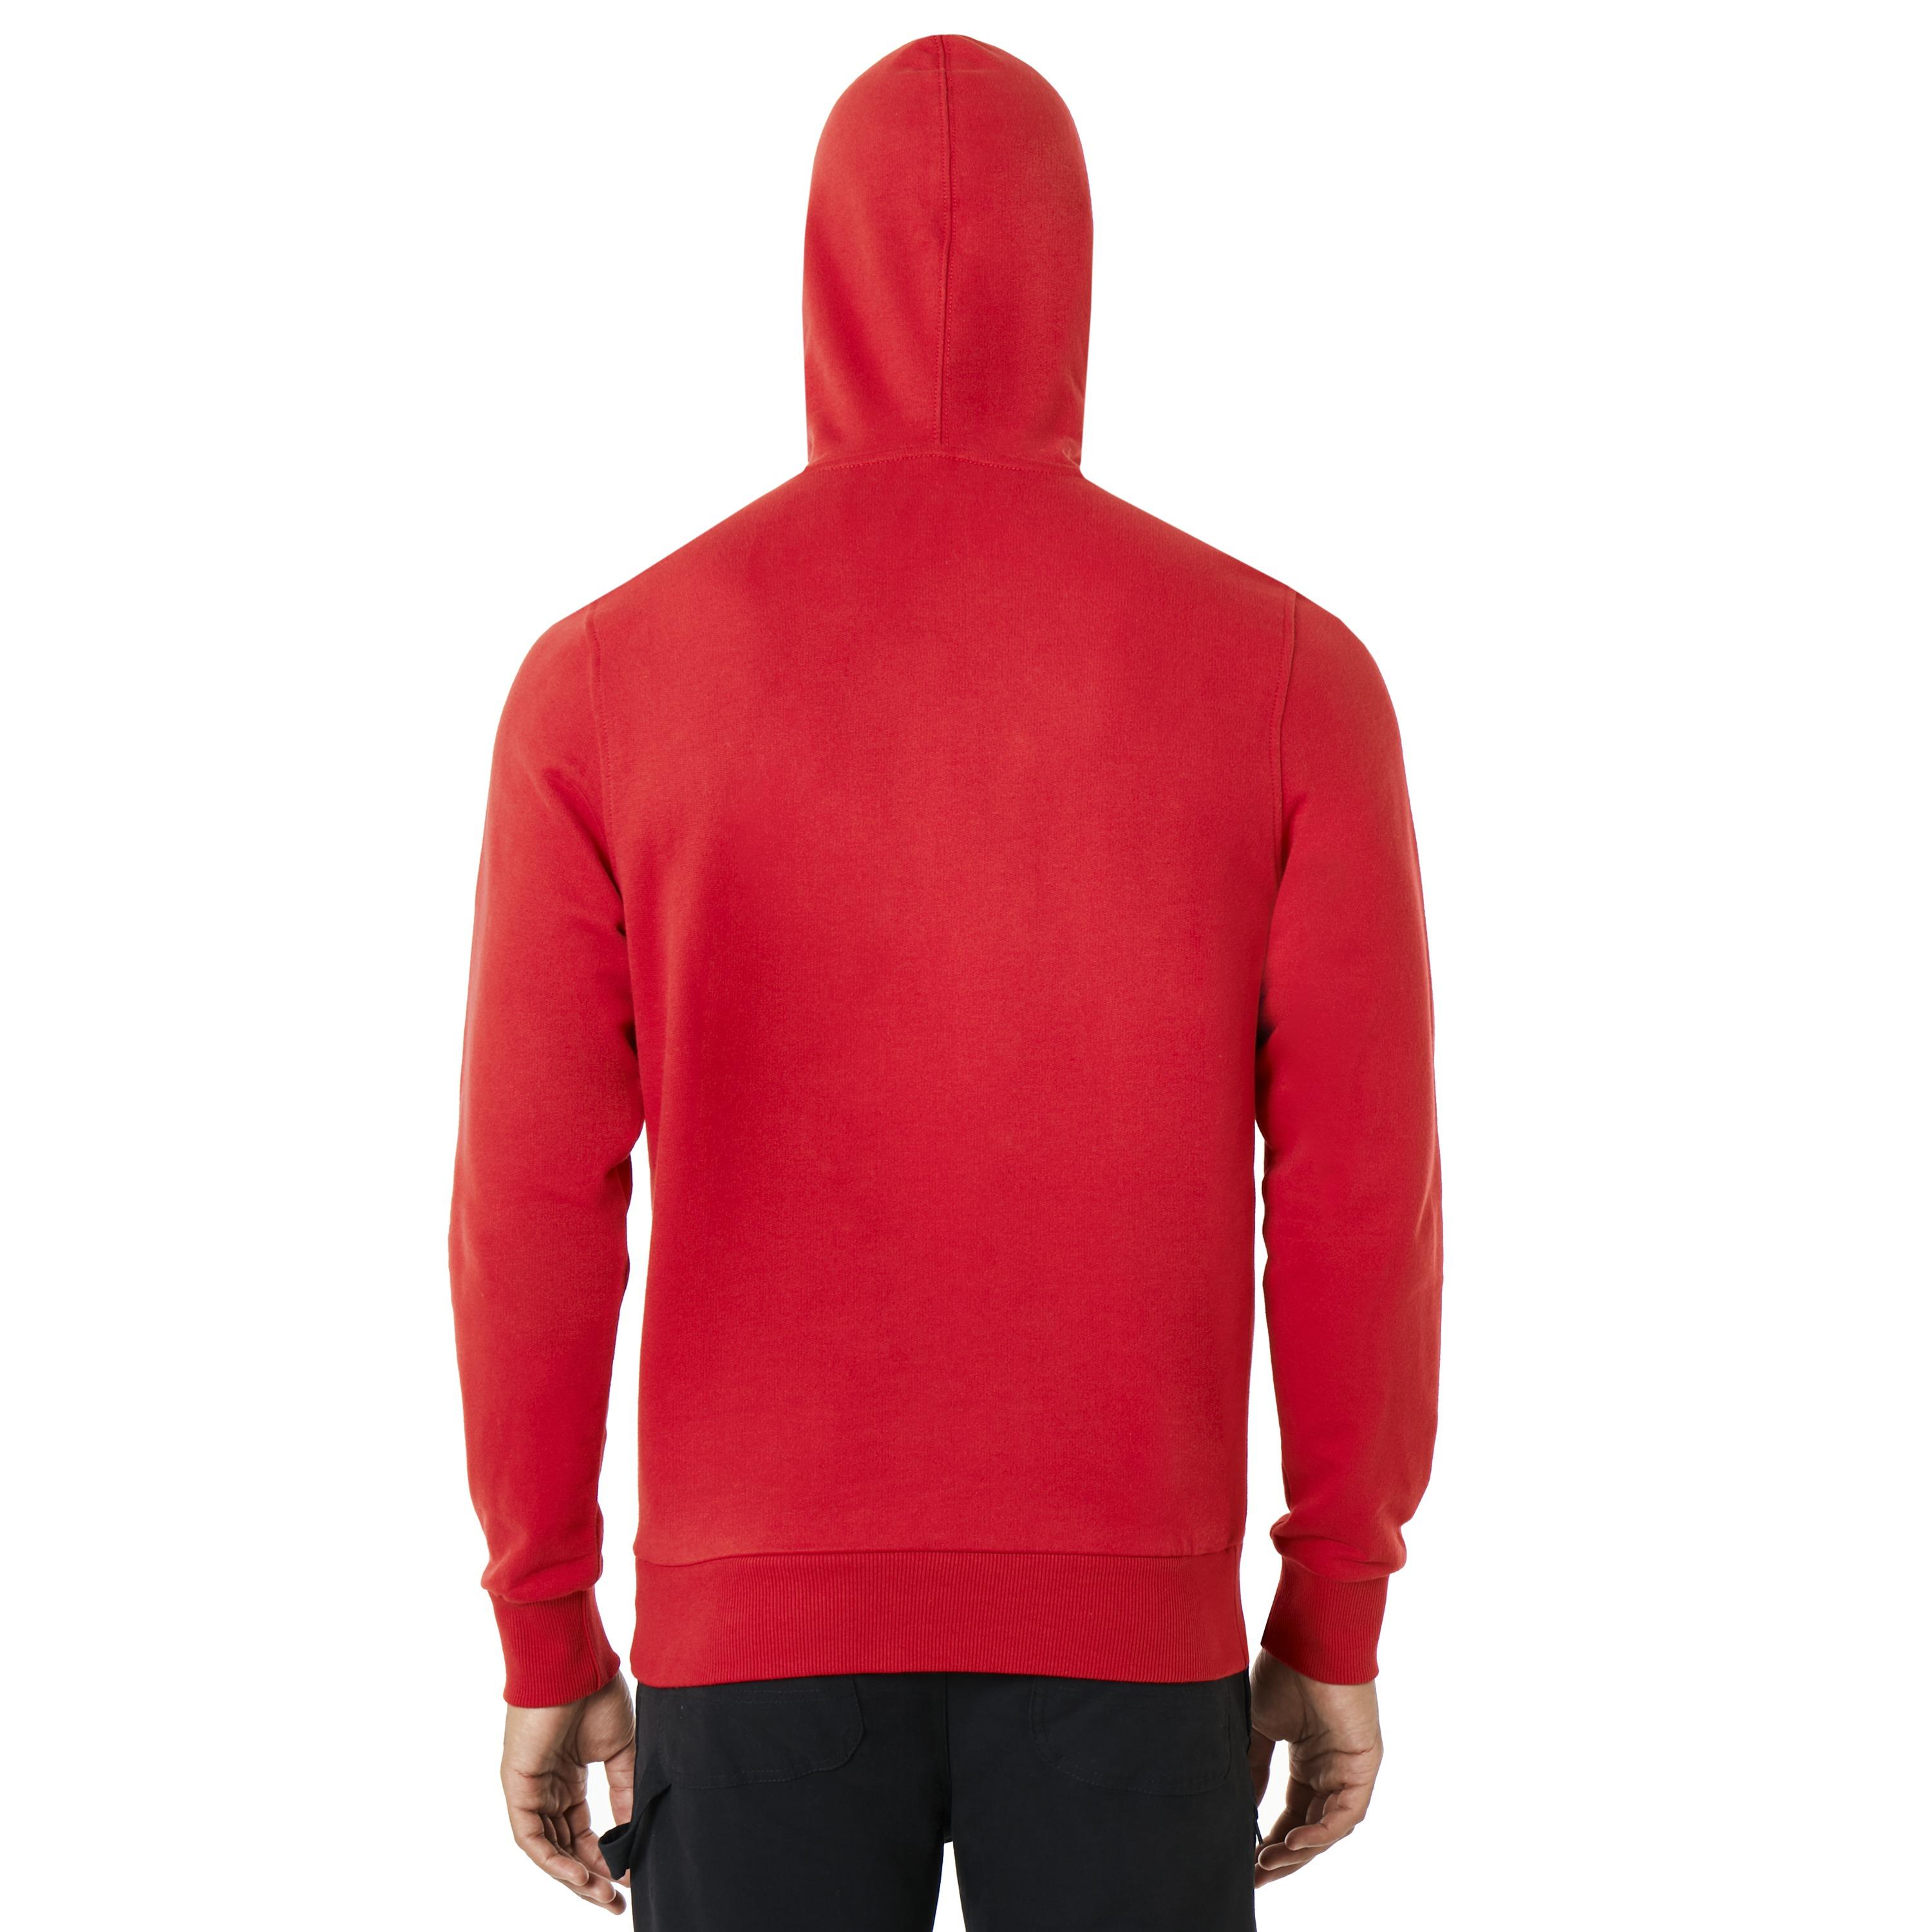 Oakley Cotton B1b Po Hoodie in Red for Men - Save 40% - Lyst